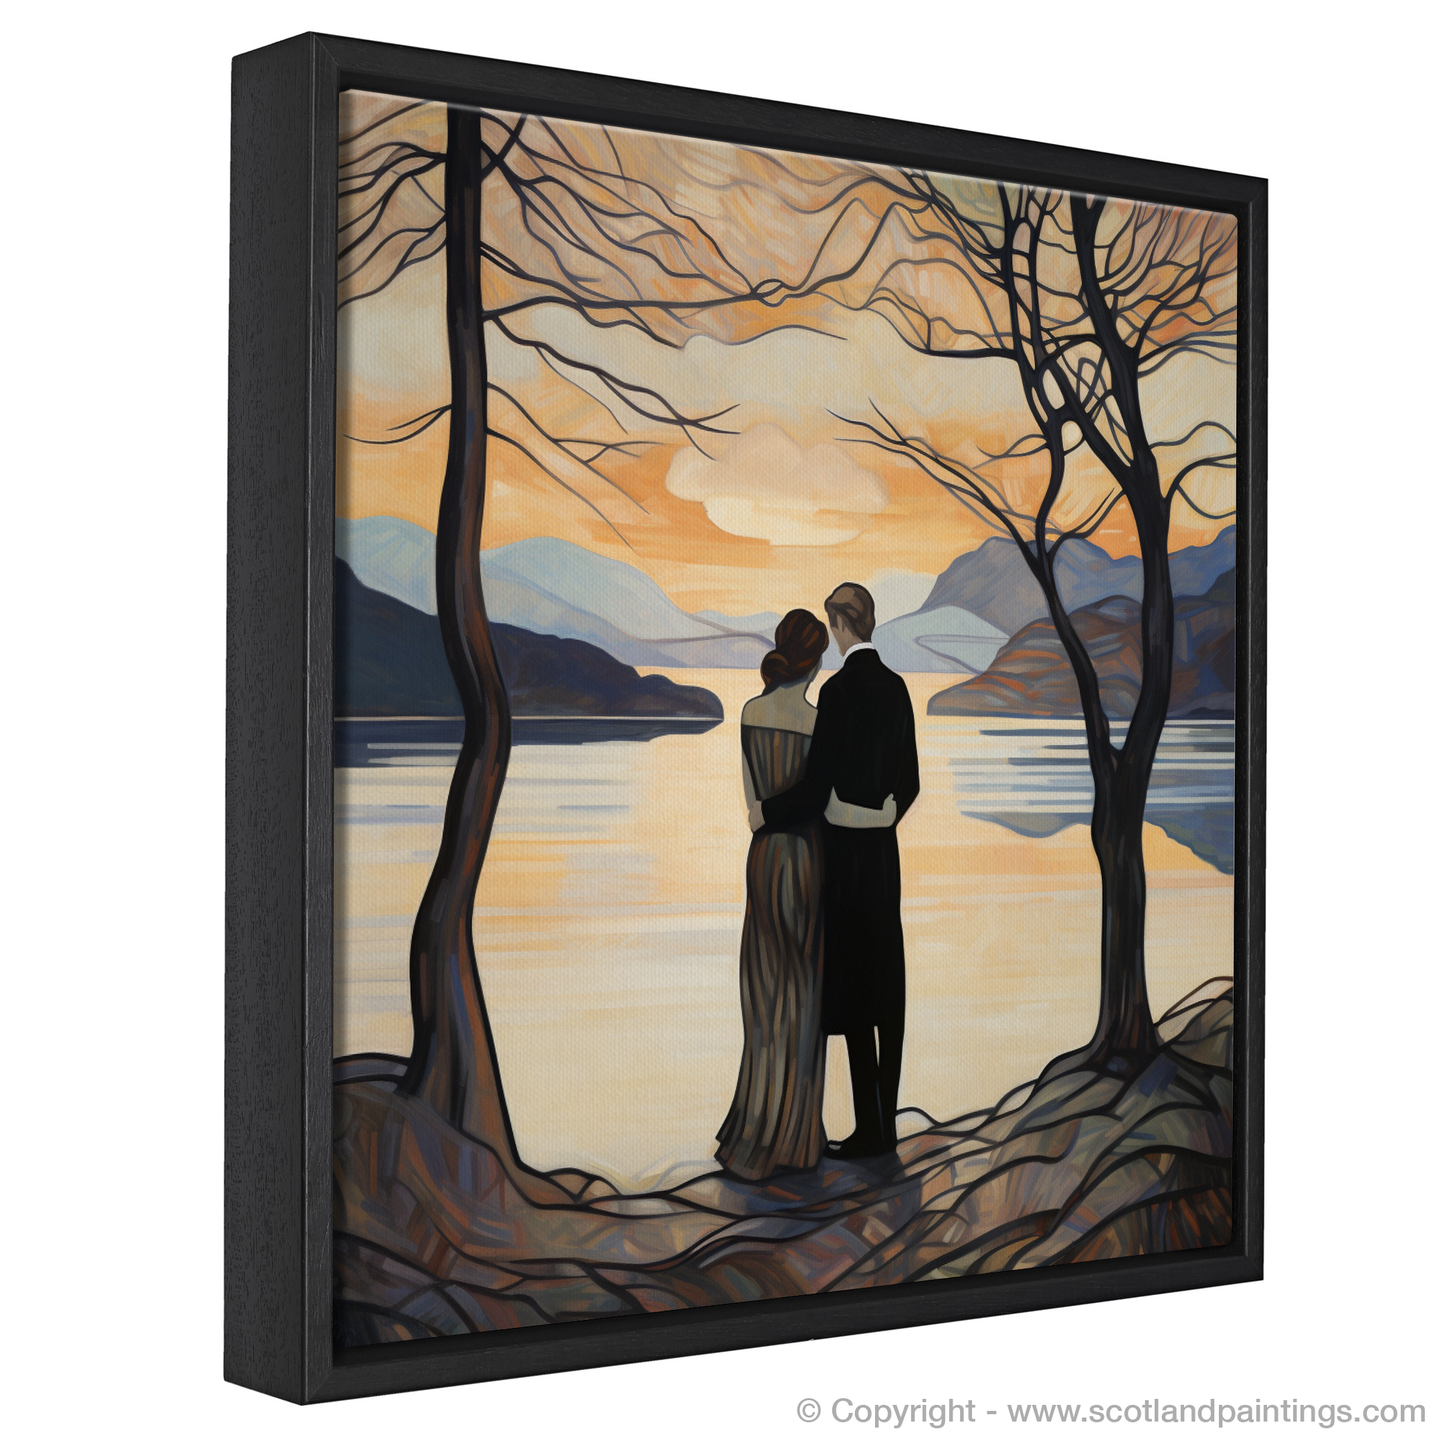 Painting and Art Print of A couple holding hands looking out on Loch Lomond entitled "Embracing the Beauty of Loch Lomond".